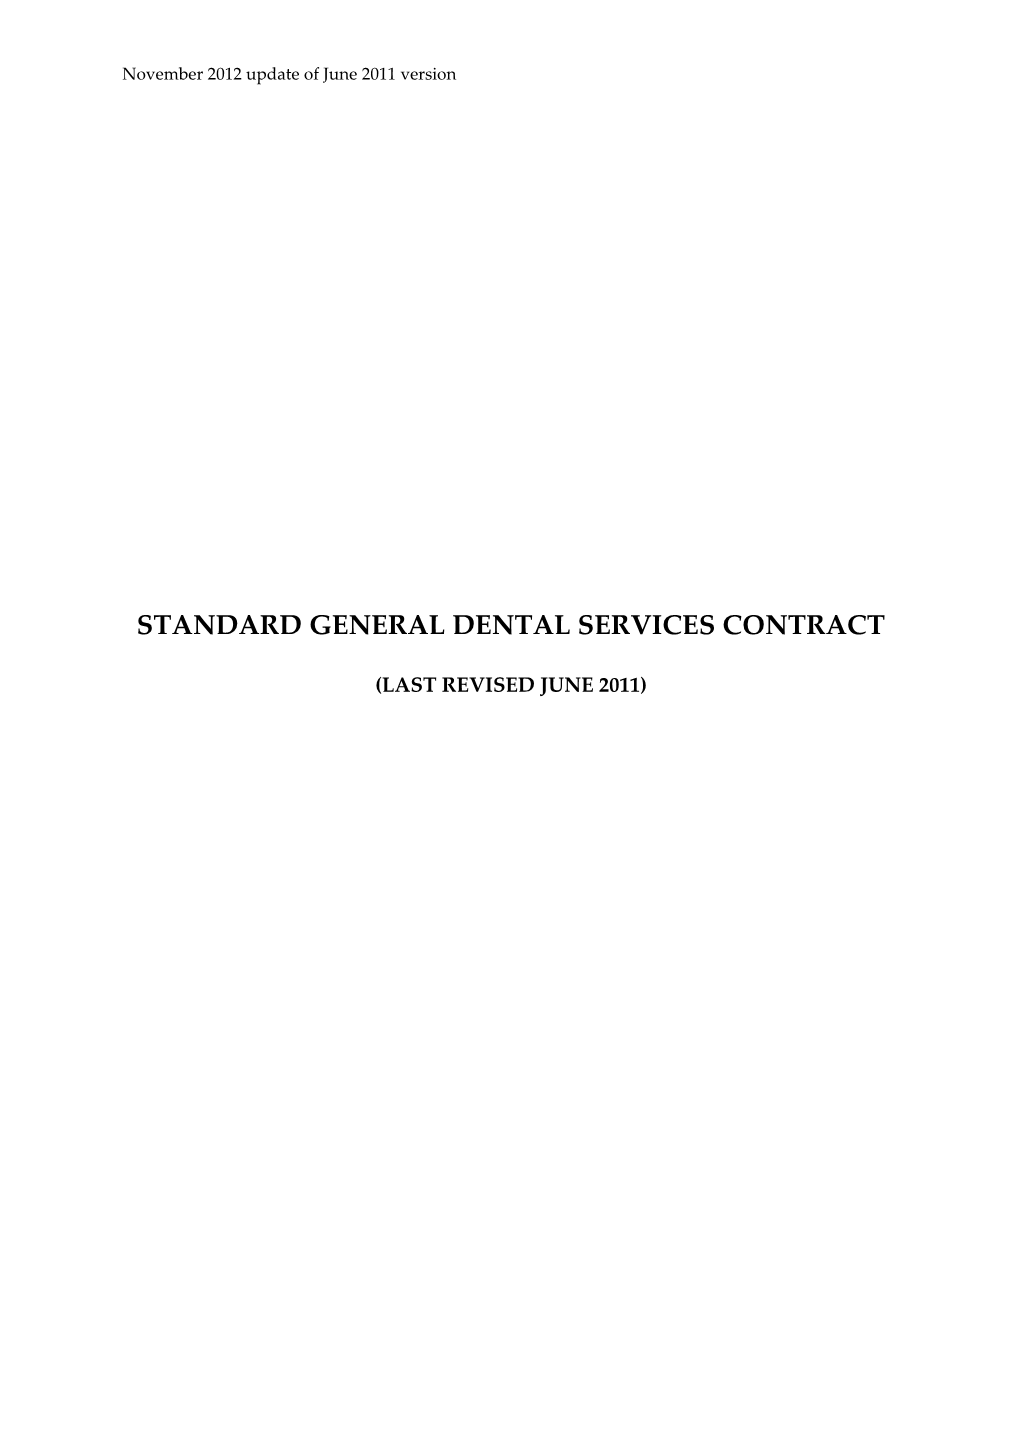 Standard General Dental Services Contract